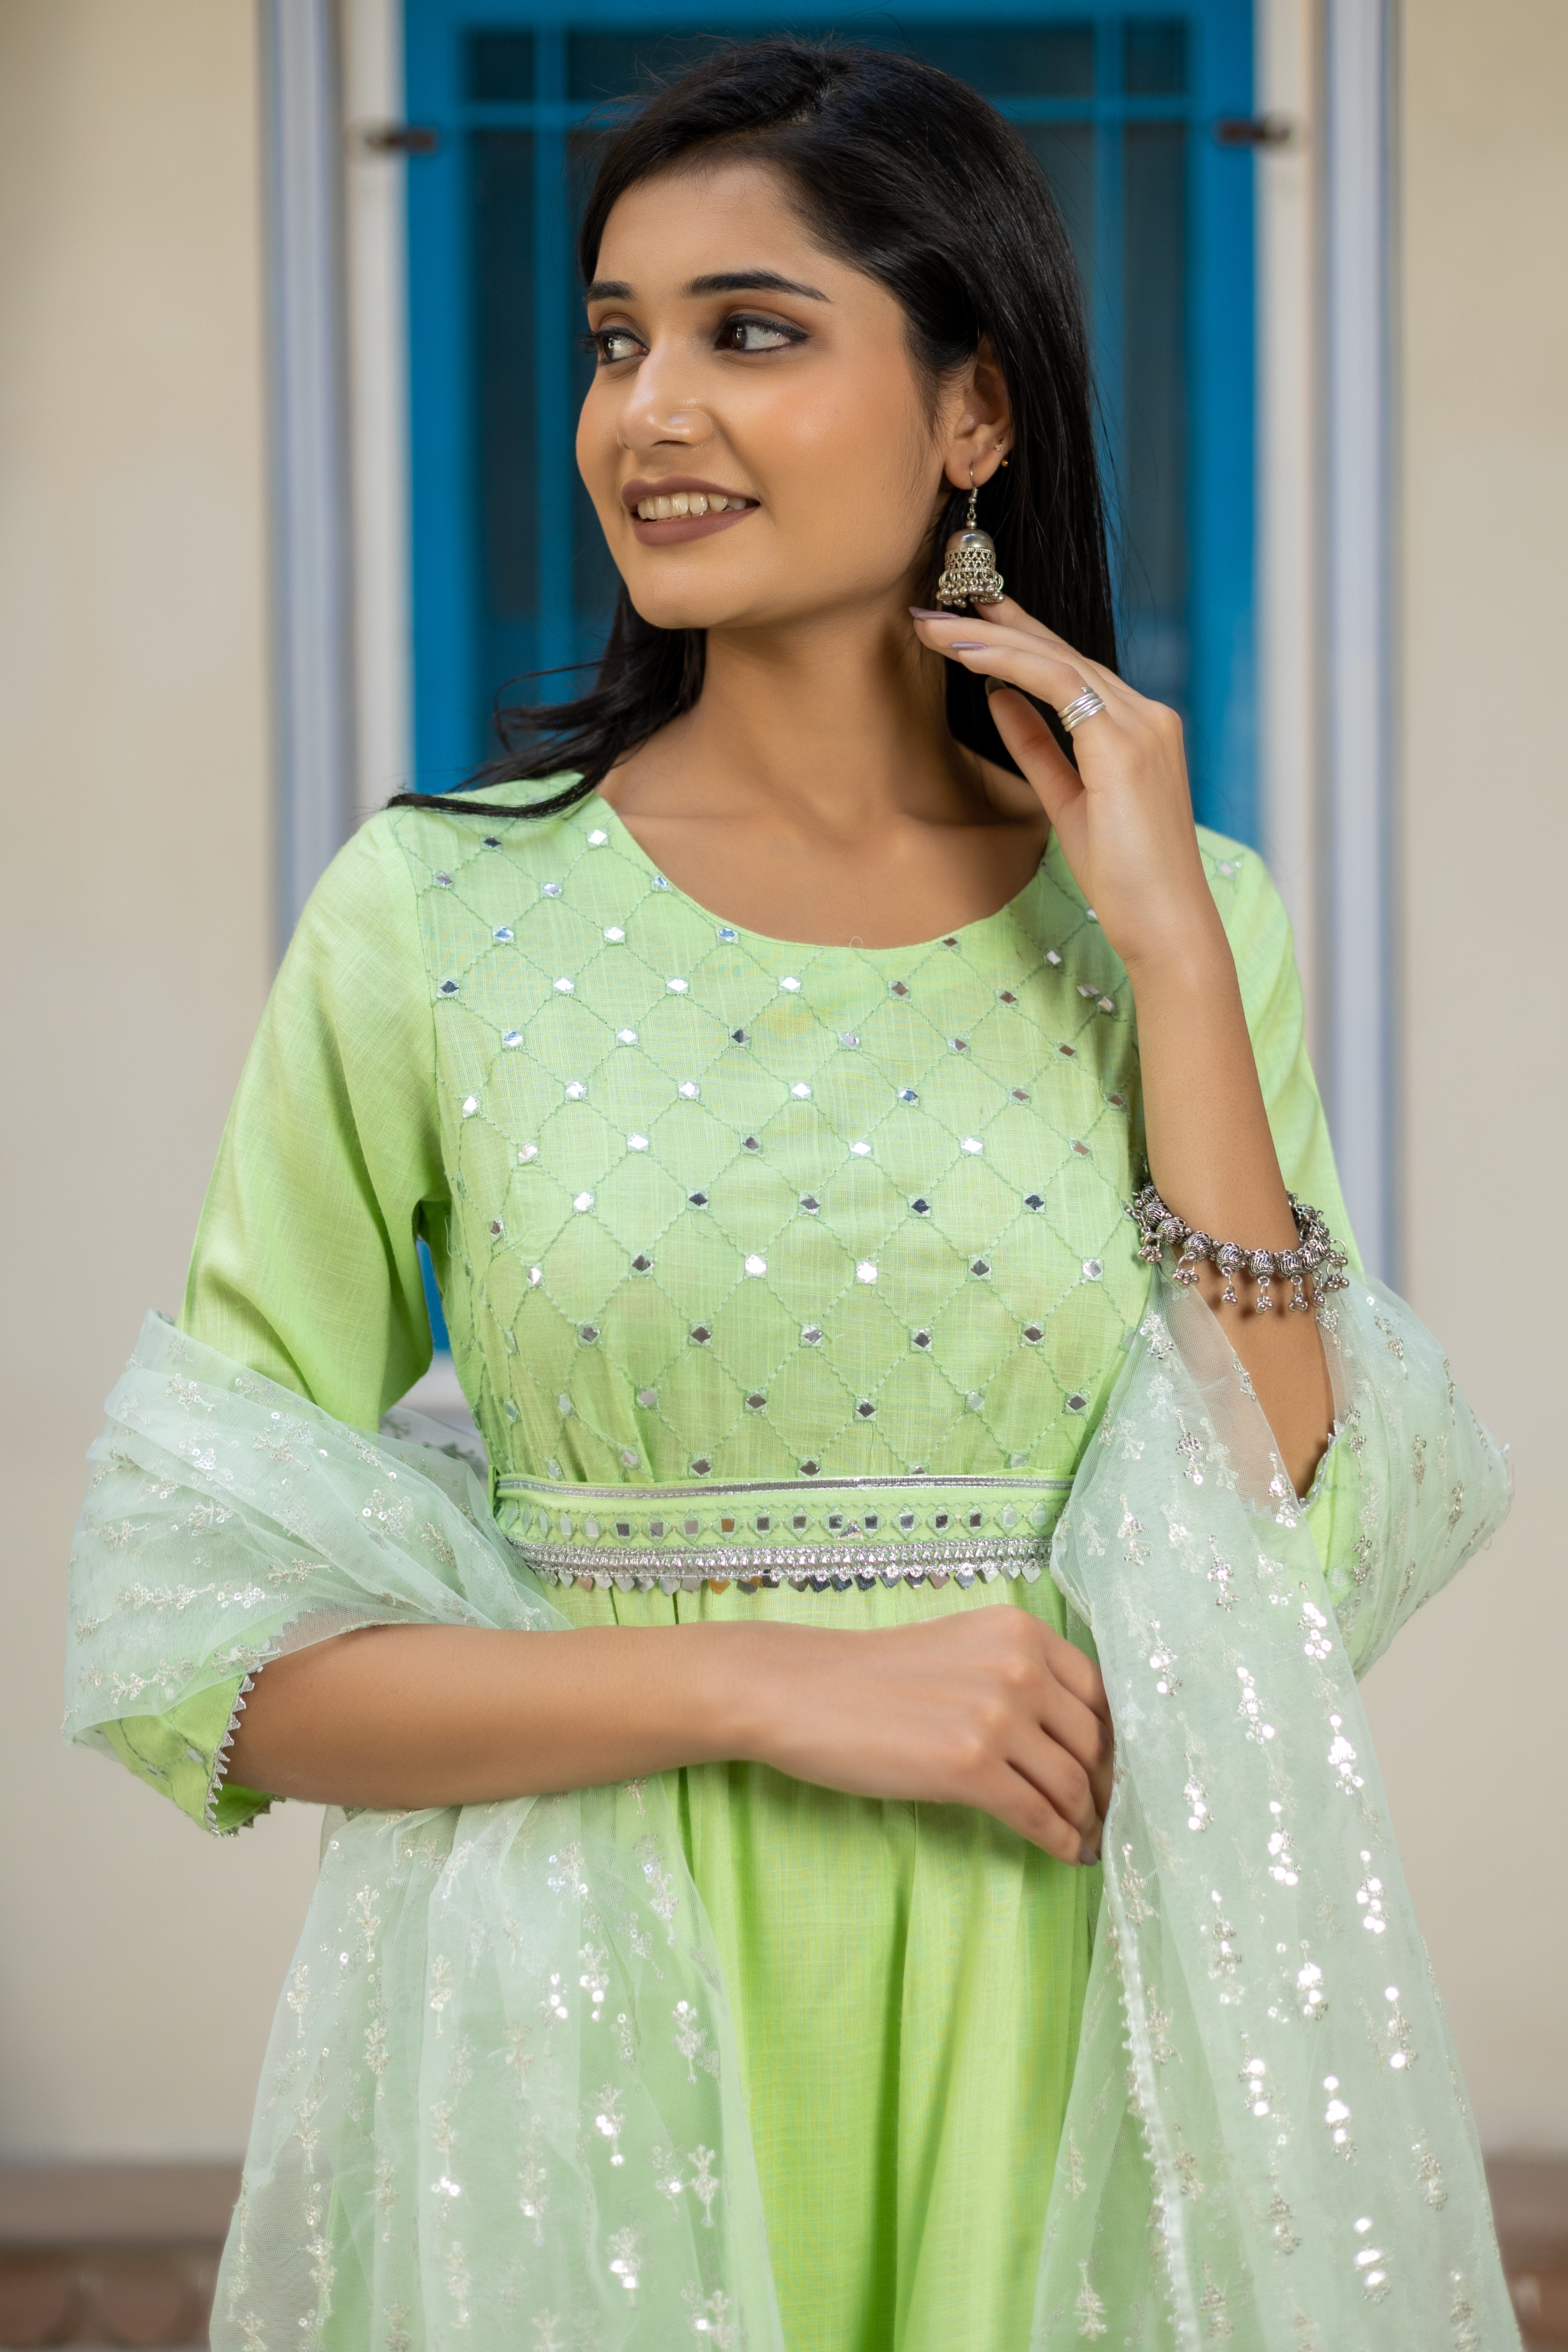 embroidered-anarkali-kurti-set-in-rayon-slub-with-round-neck-embellished-belt-at-waist-and-embroidered-quarter-sleeves-paired-with-straight-pant-and-sequin-dupatta